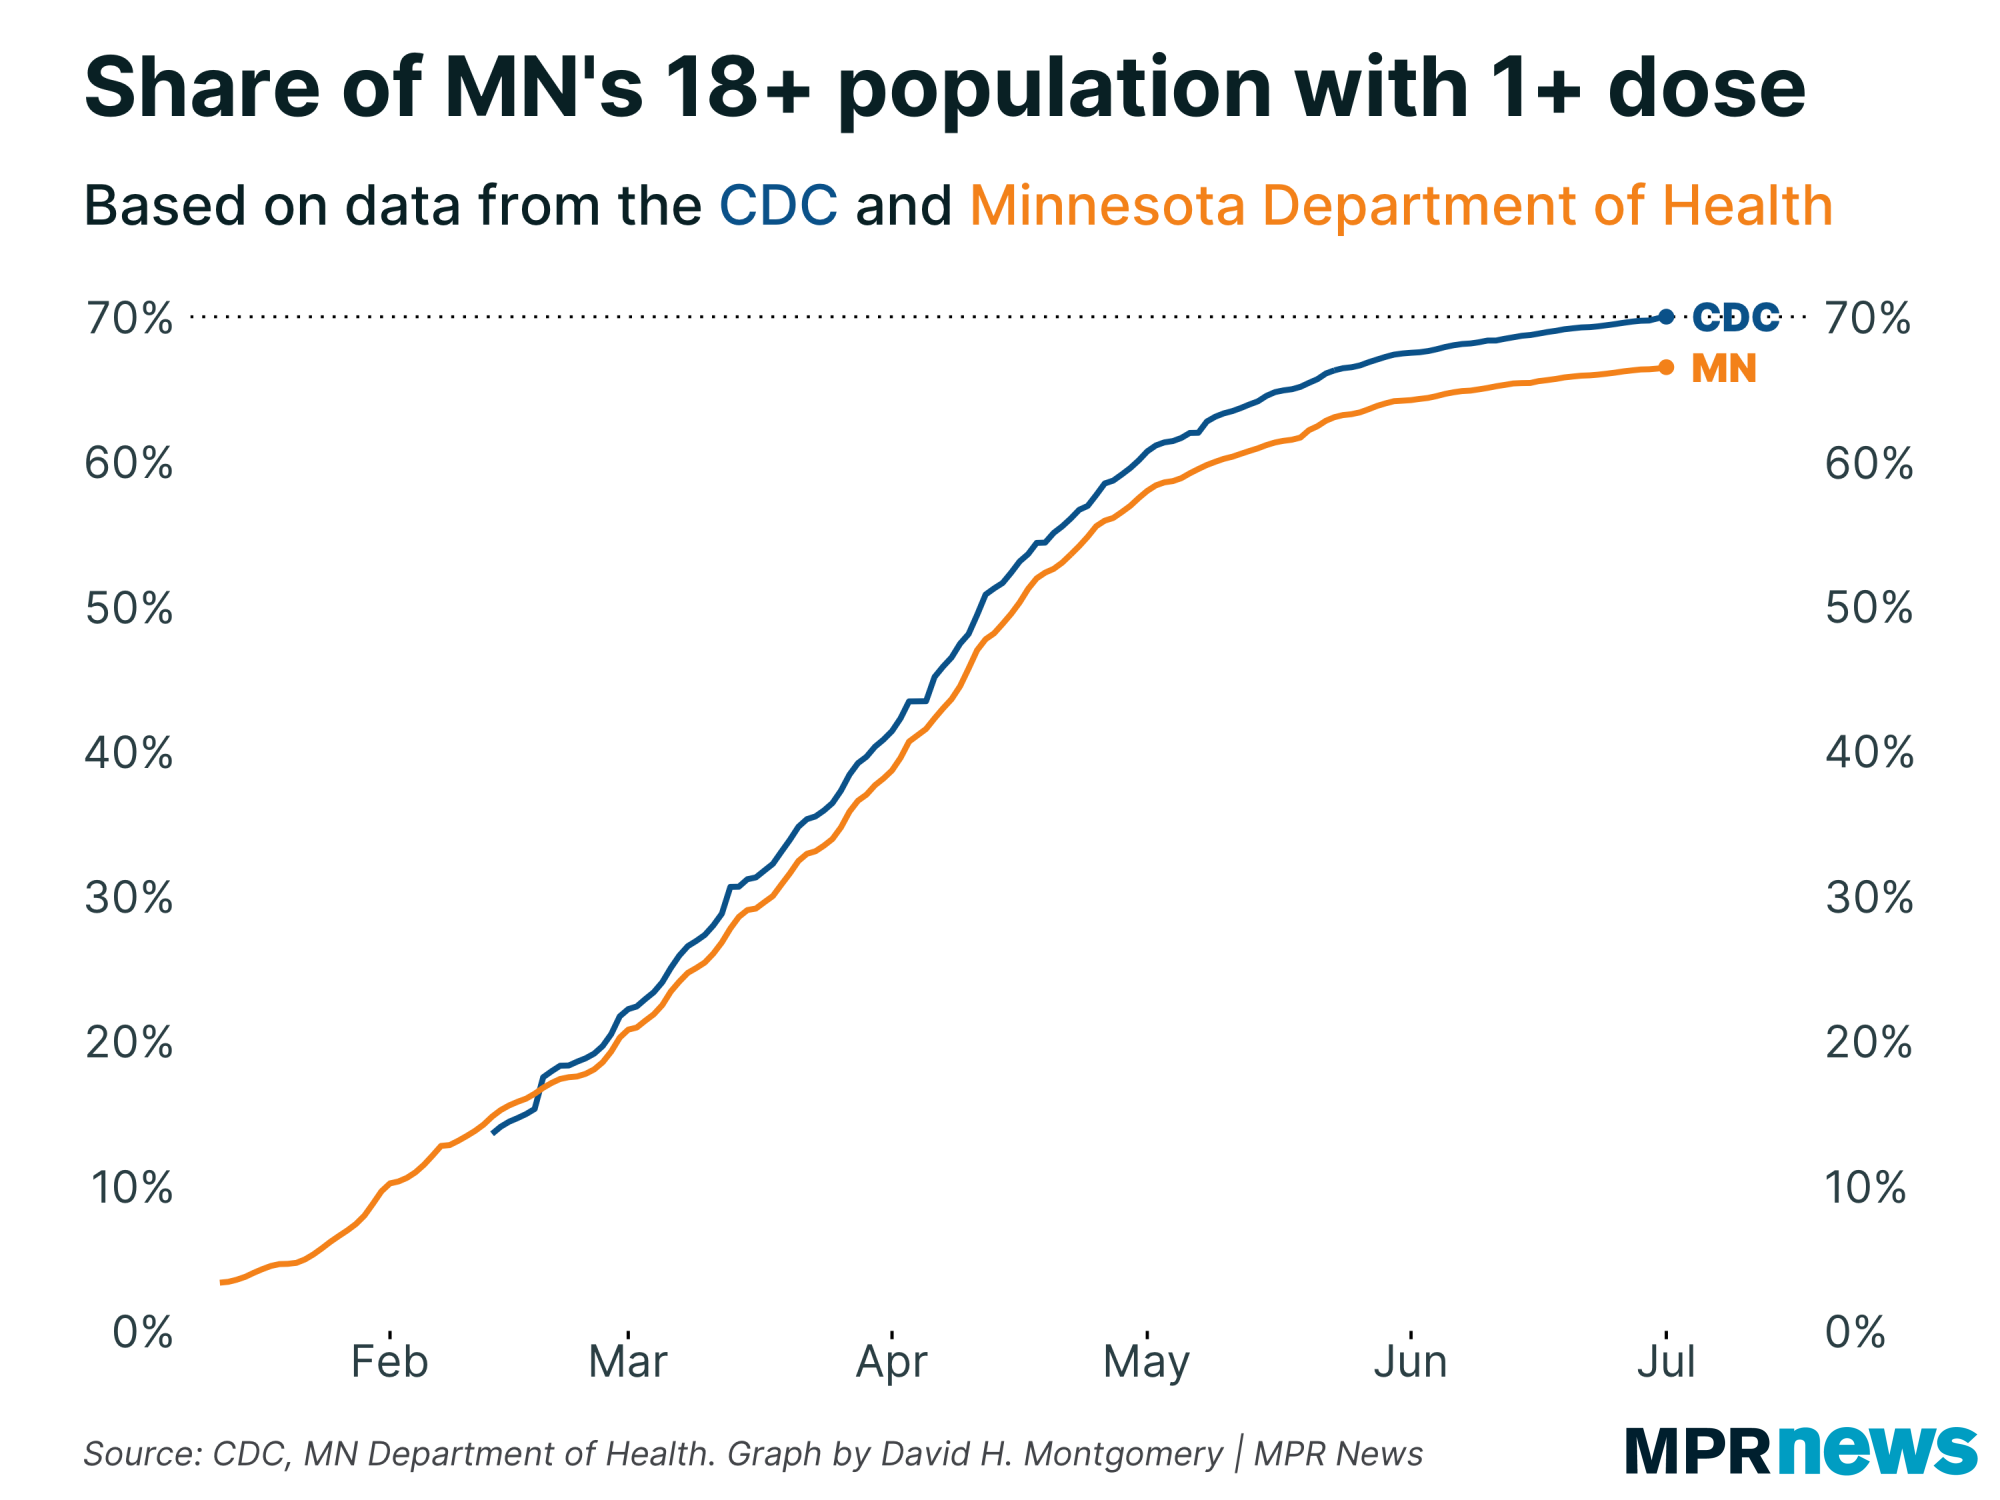 Graph of the share of Minnesota's 18+ population with 1 or more dose, by CDC vs. MDH data